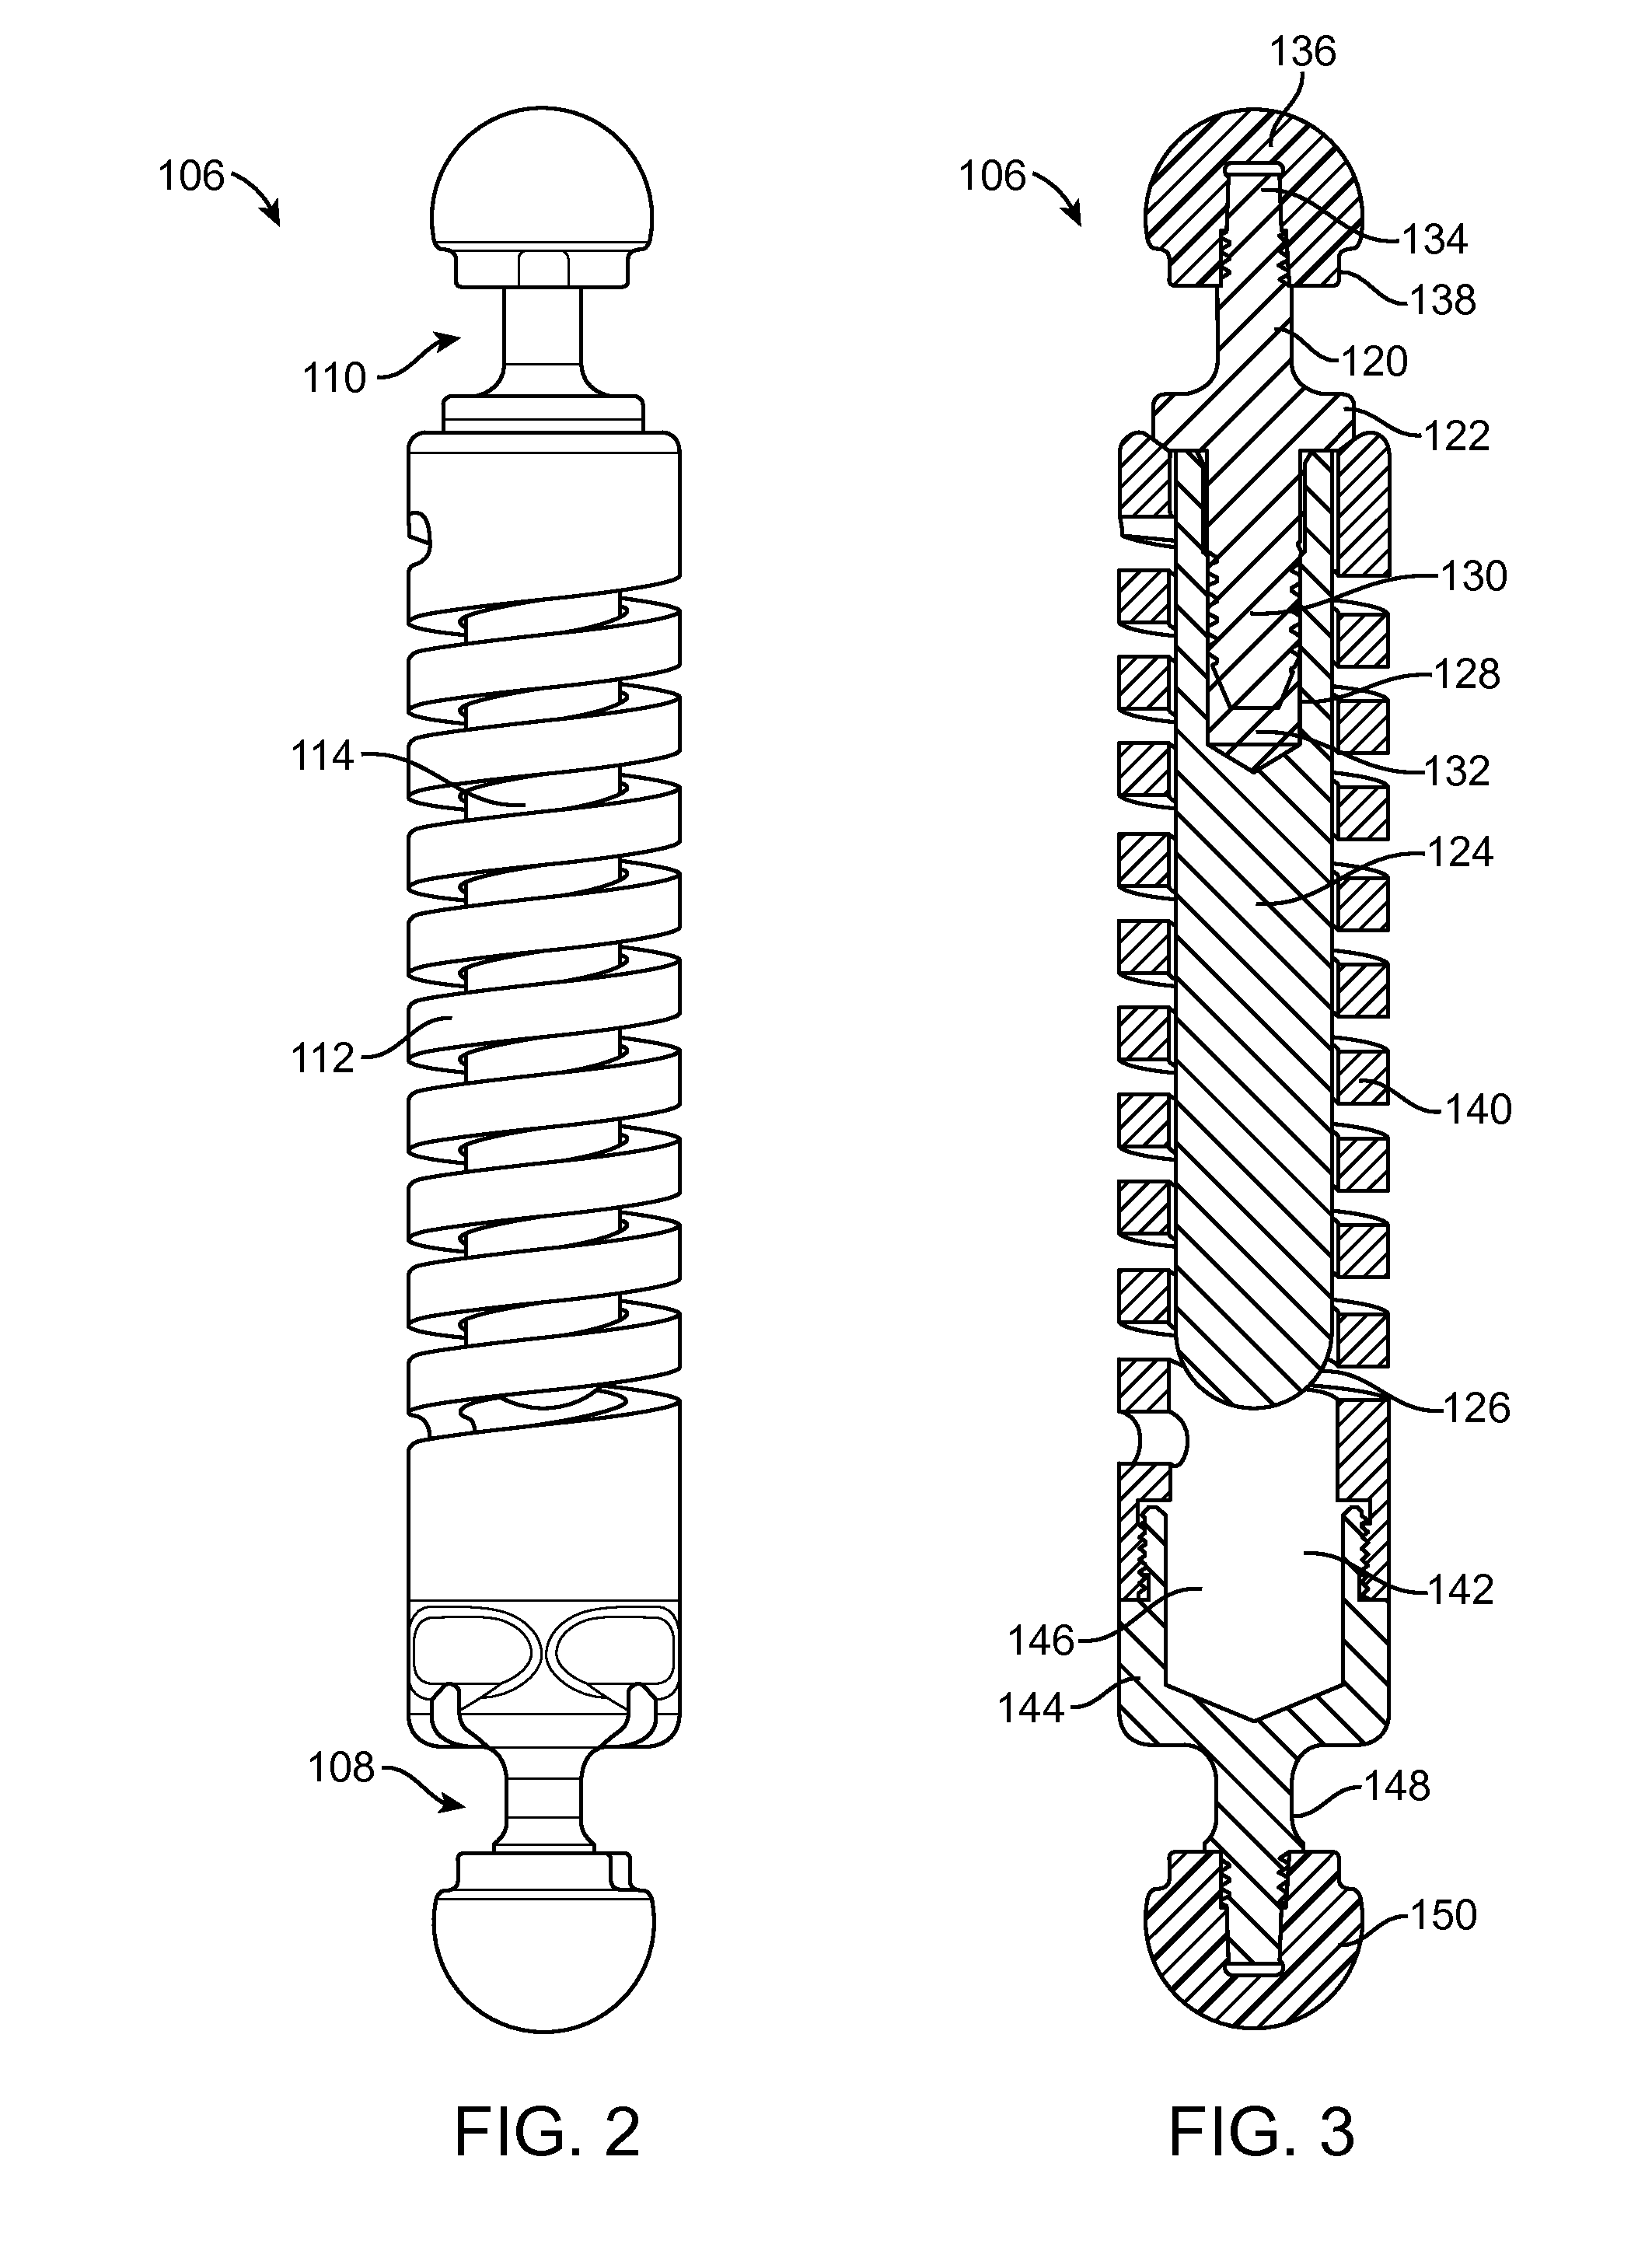 Joint Energy Absorbing System and Method of Use